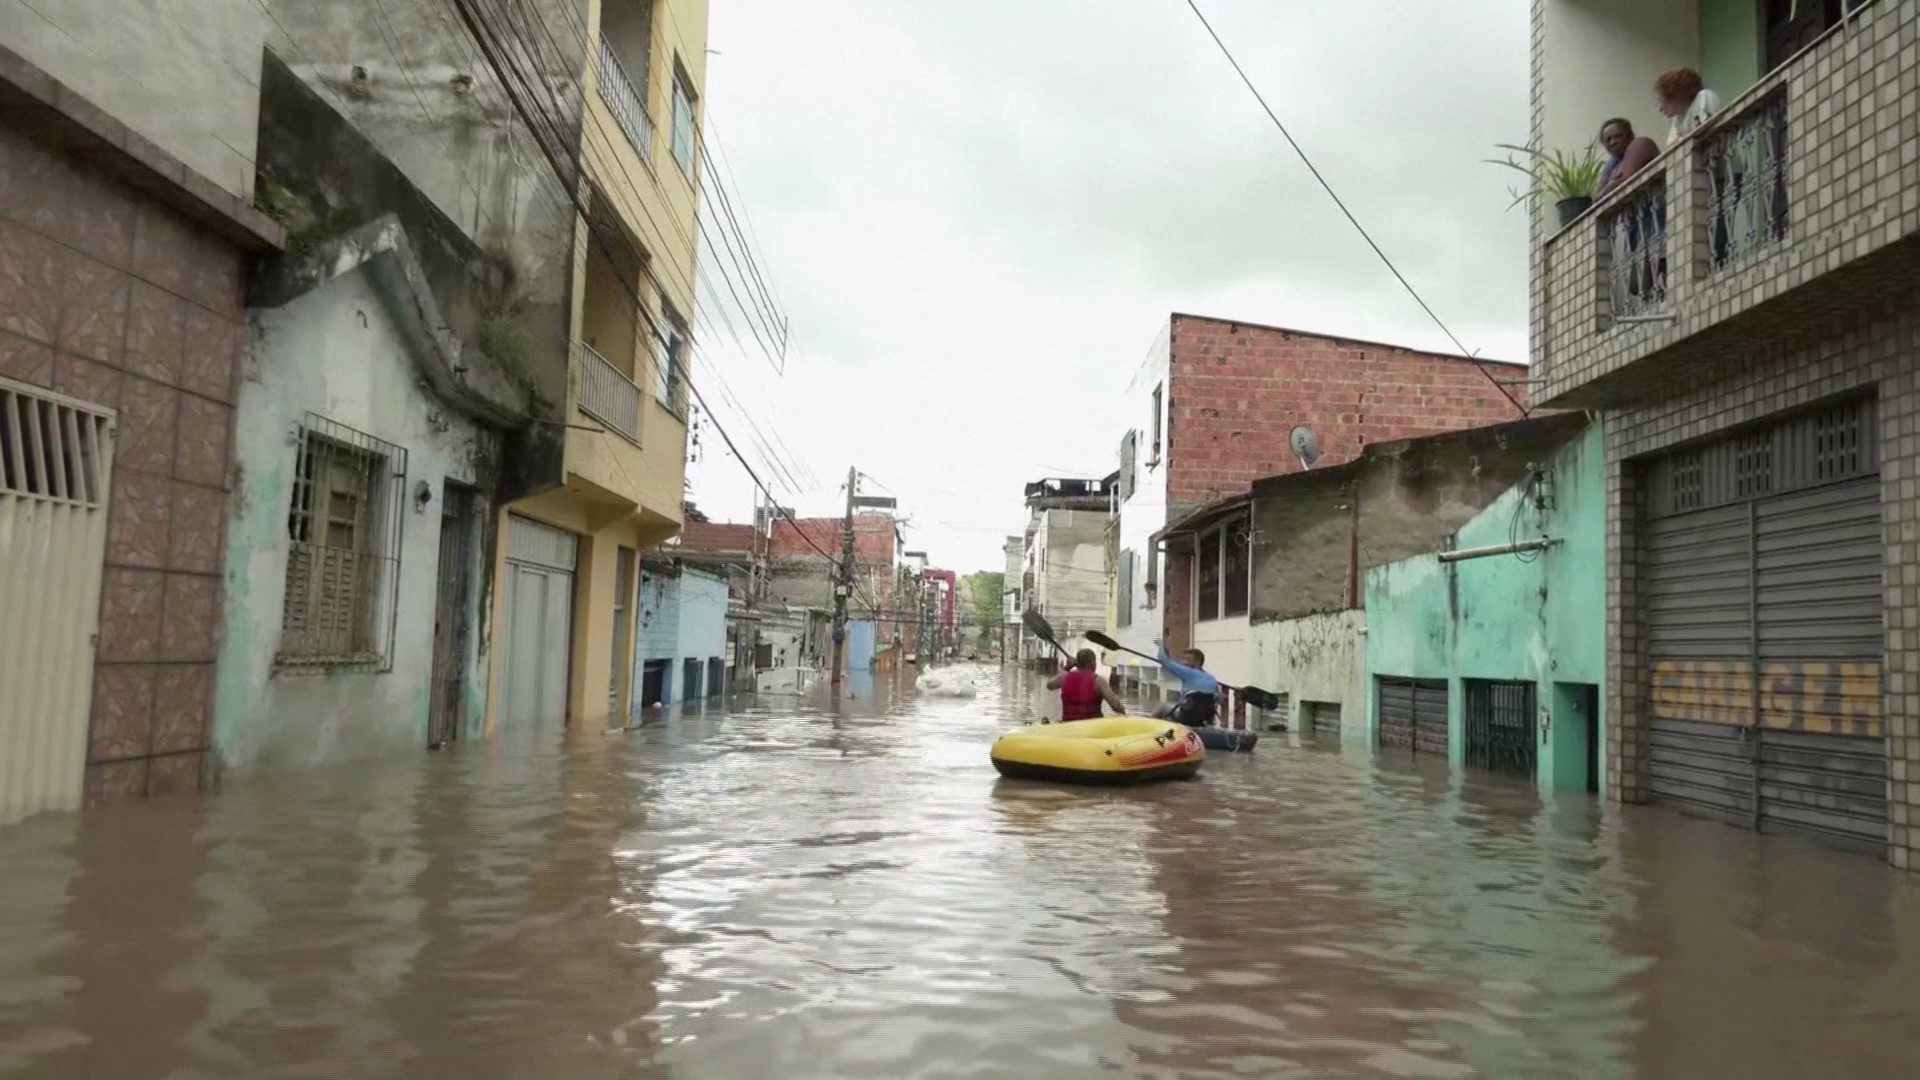 21 dead due to severe flooding in Bahia state of Brazil : Peoples Dispatch